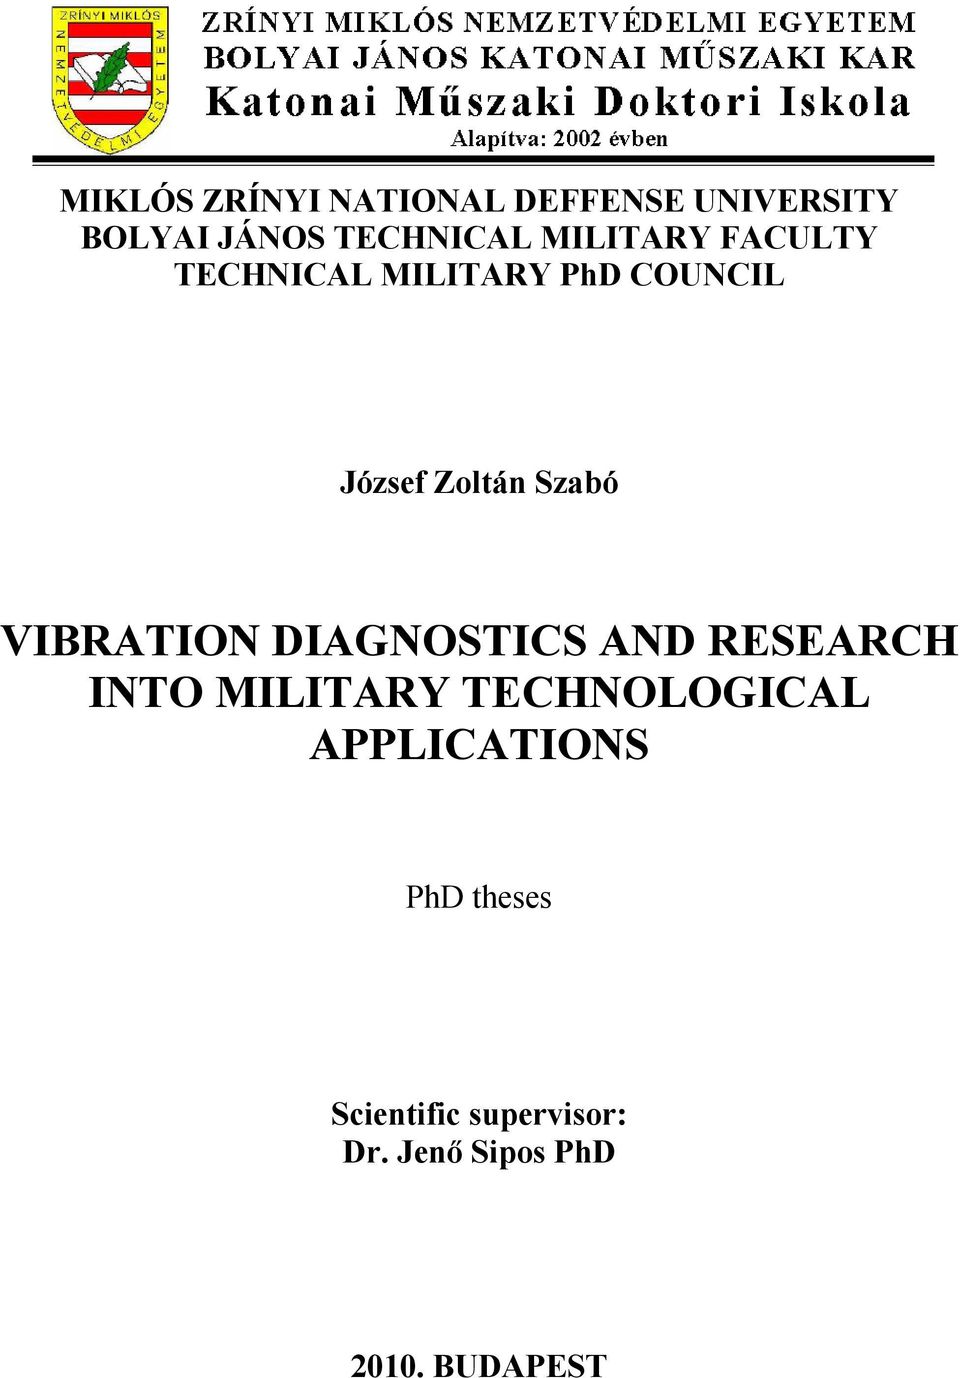 VIBRATION DIAGNOSTICS AND RESEARCH INTO MILITARY TECHNOLOGICAL